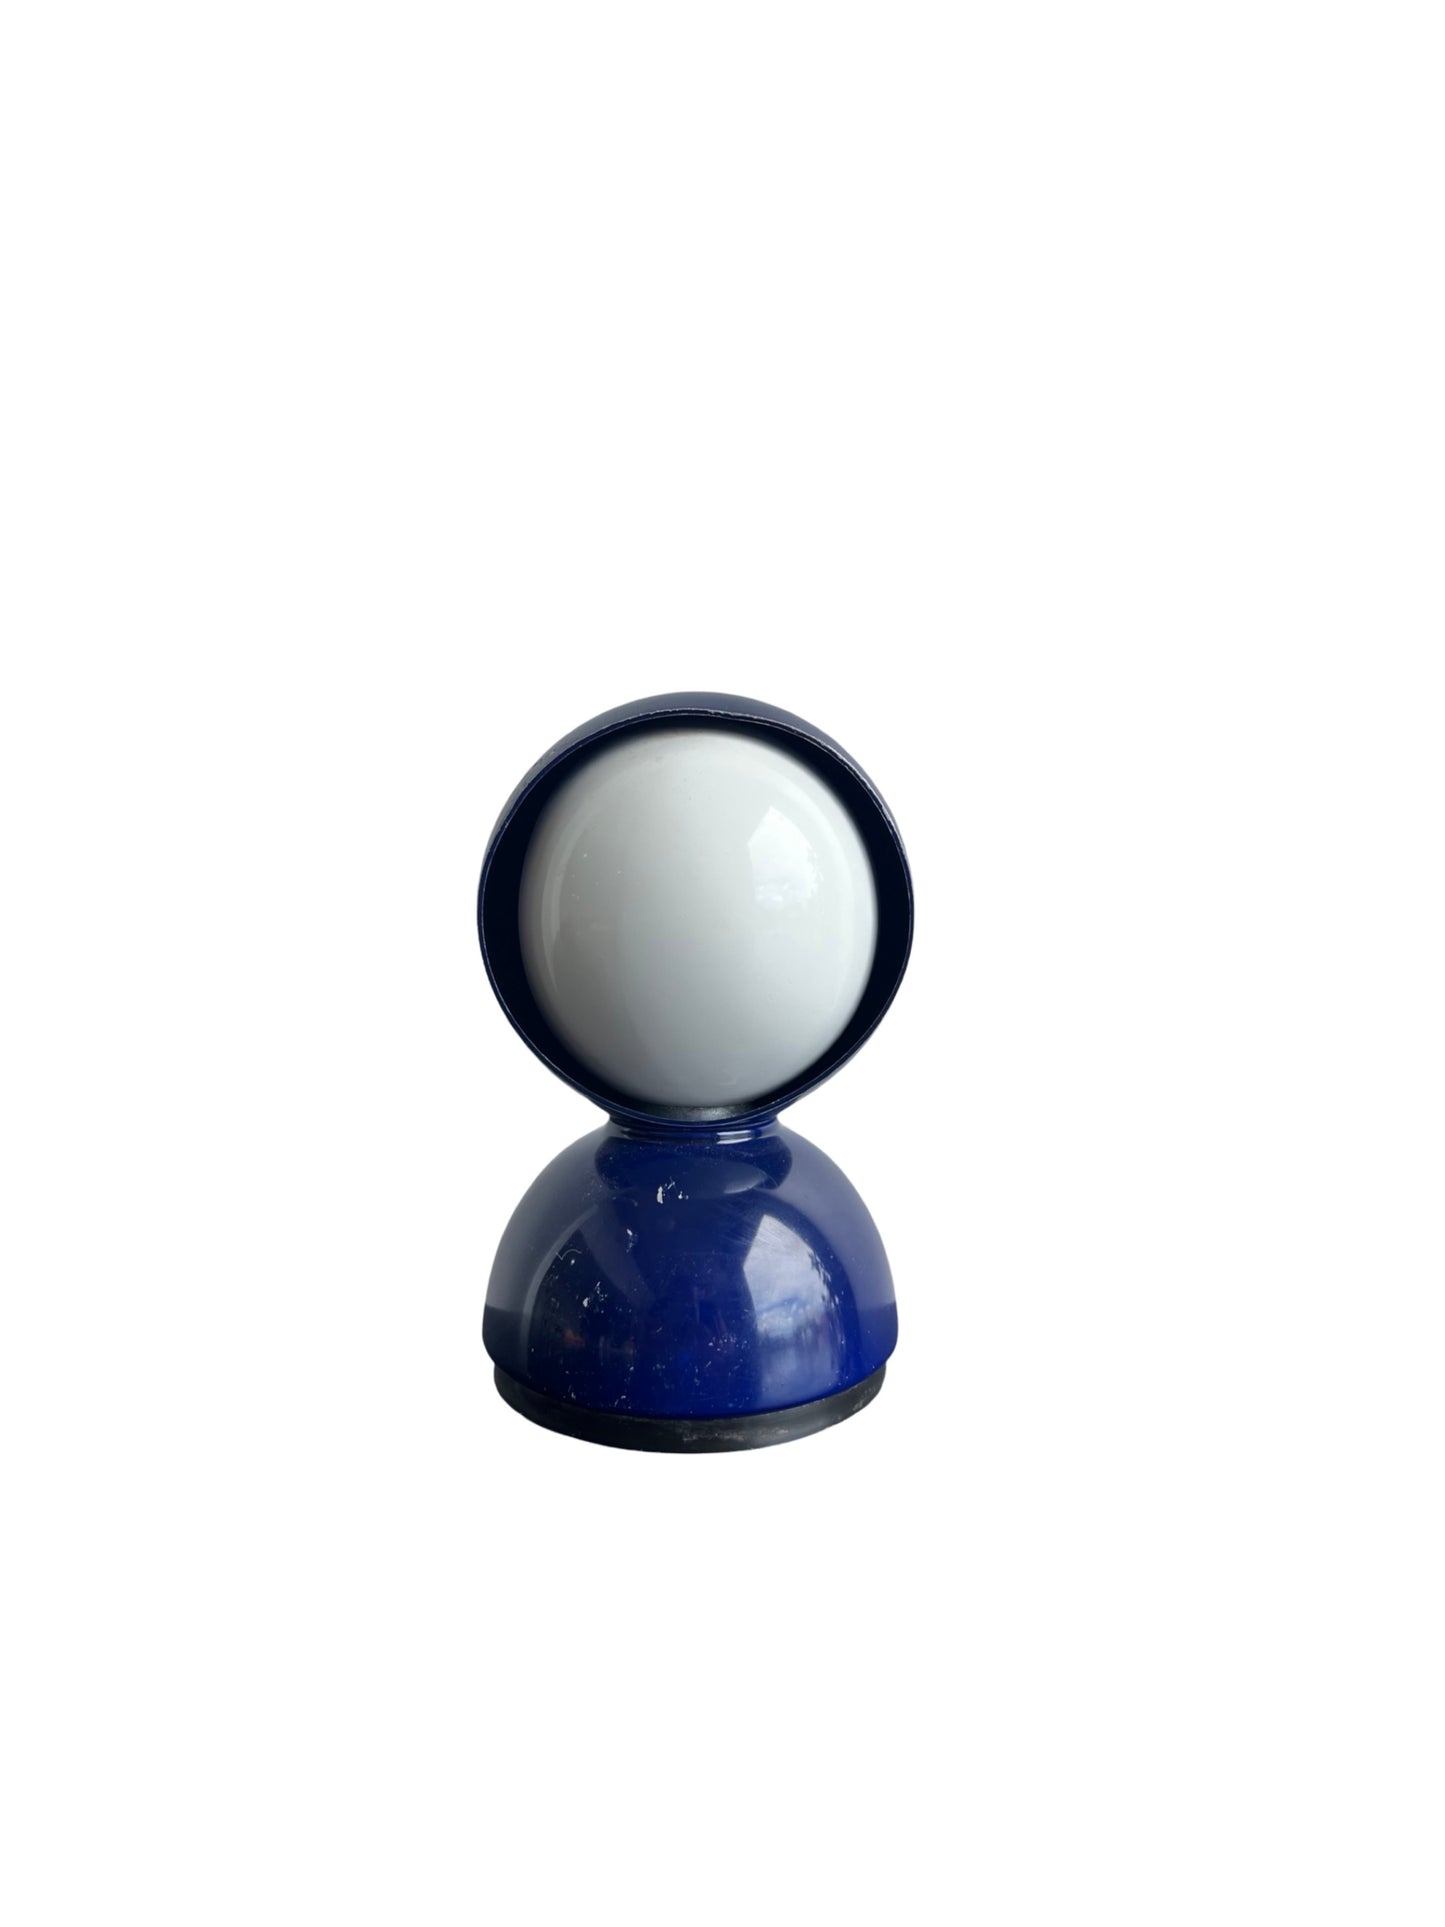 "Eclisse" by Vico Magistretti for Artemide, Blue Table Lamp, 1967